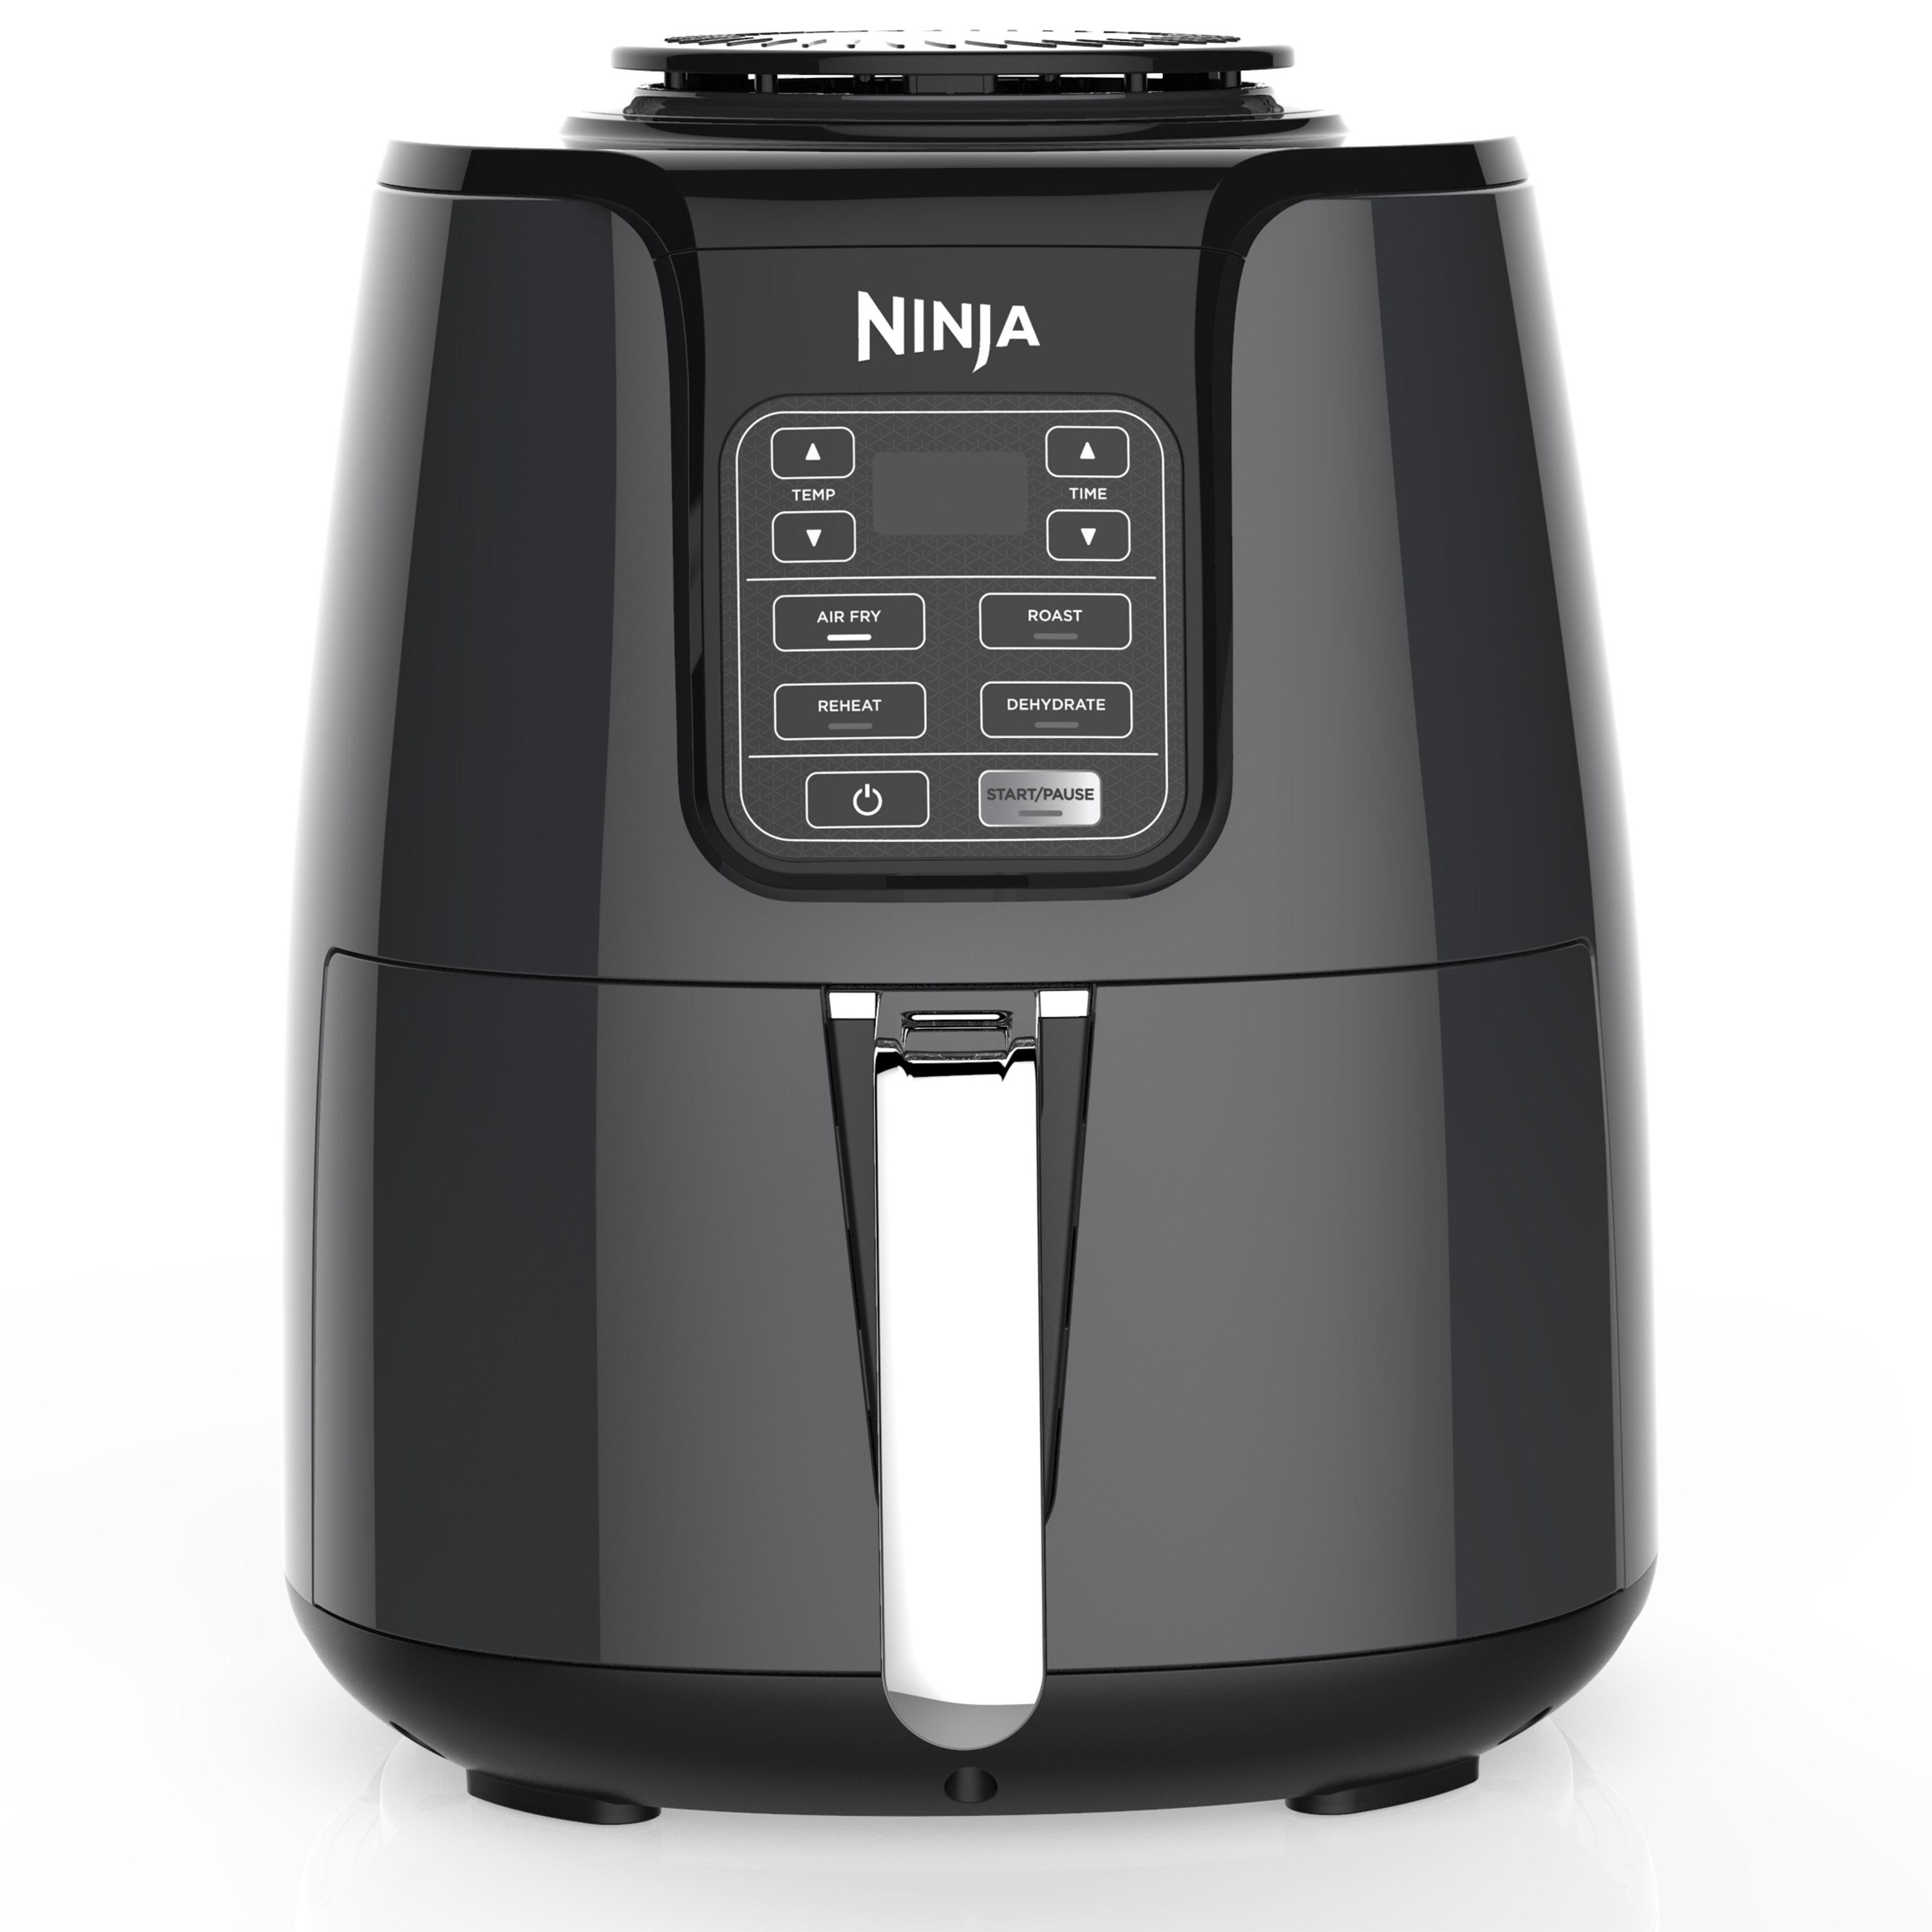 The air fryer, featuring a digital timer, pre-set buttons, and a handle for the cooking basket